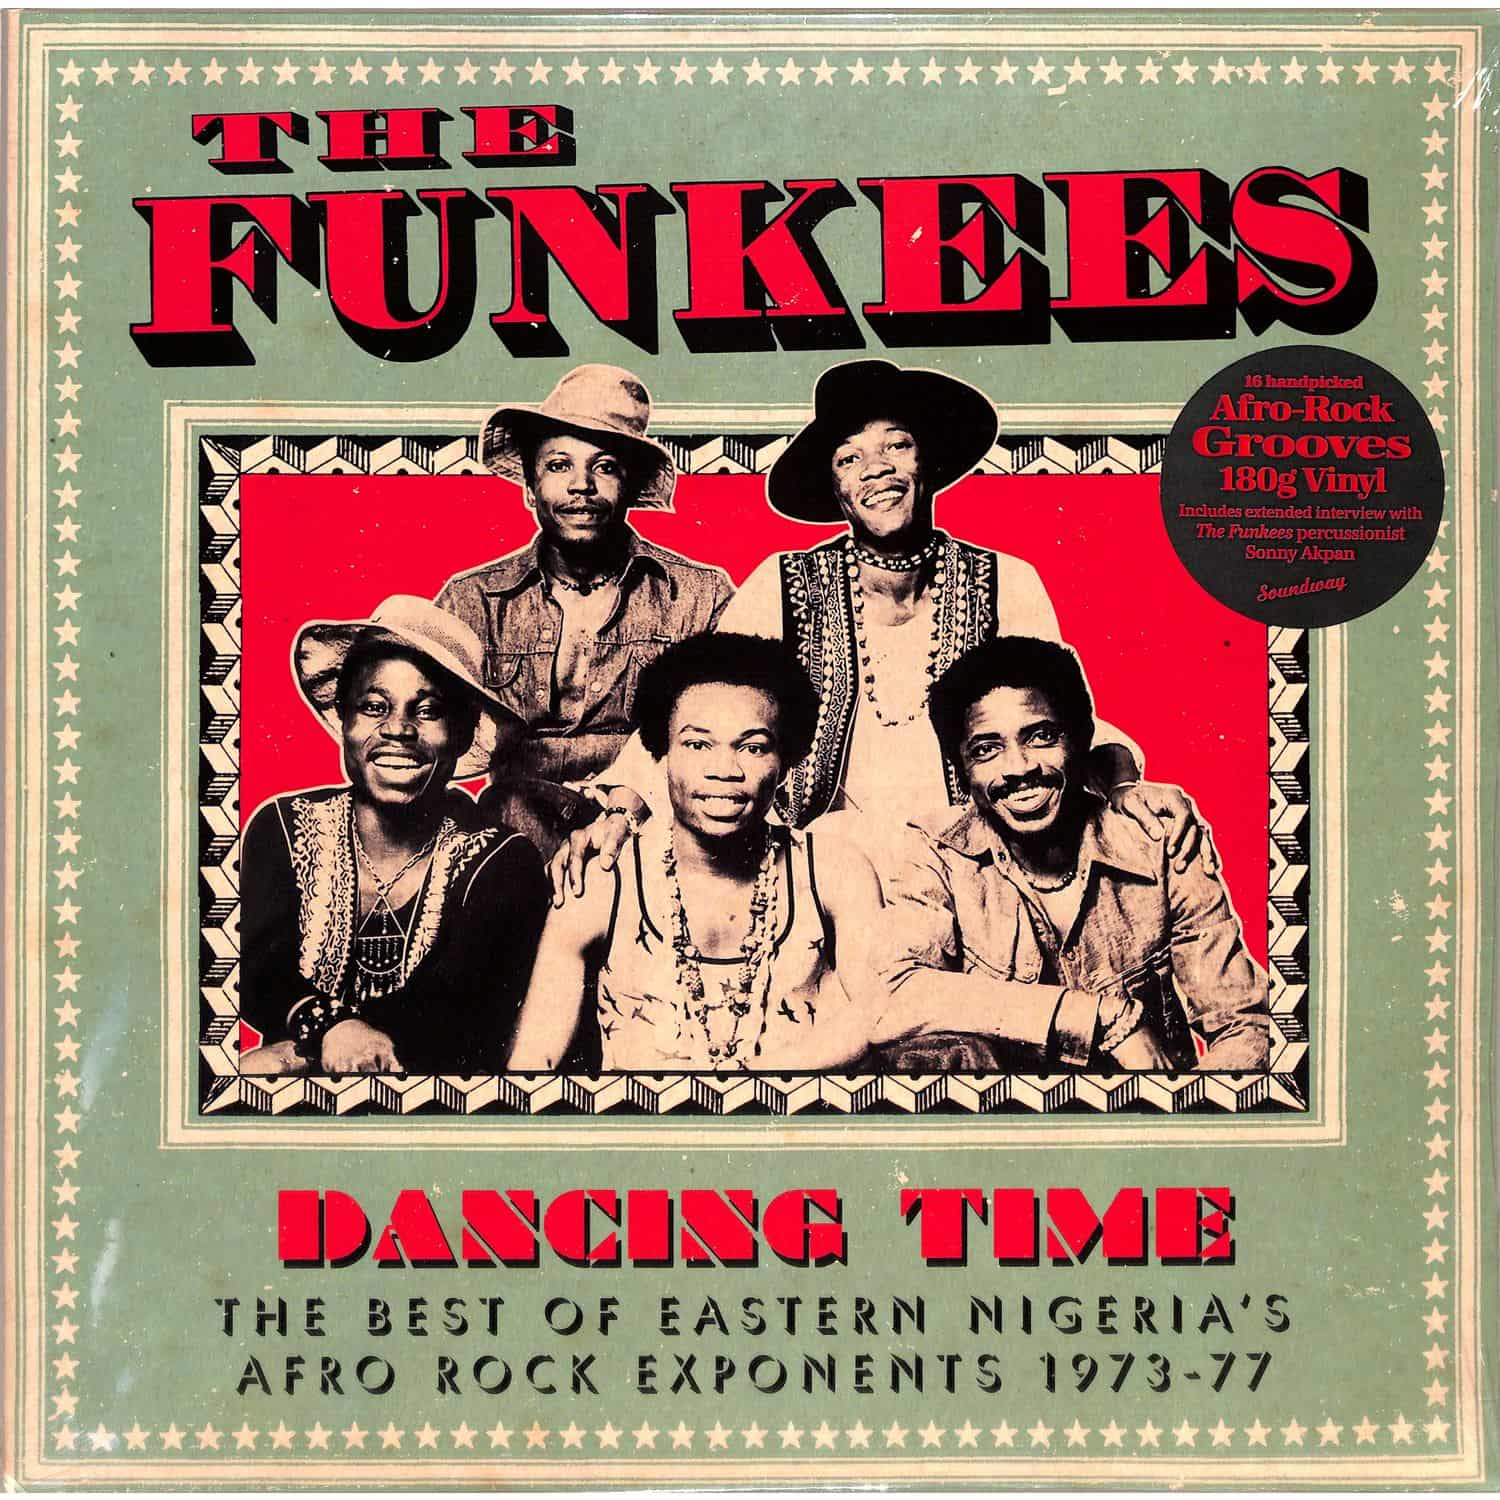 The Funkees - DANCING TIME - THE BEST OF EASTERN NIGERIAS AFRO ROCK EXPONENTS 1973-77 